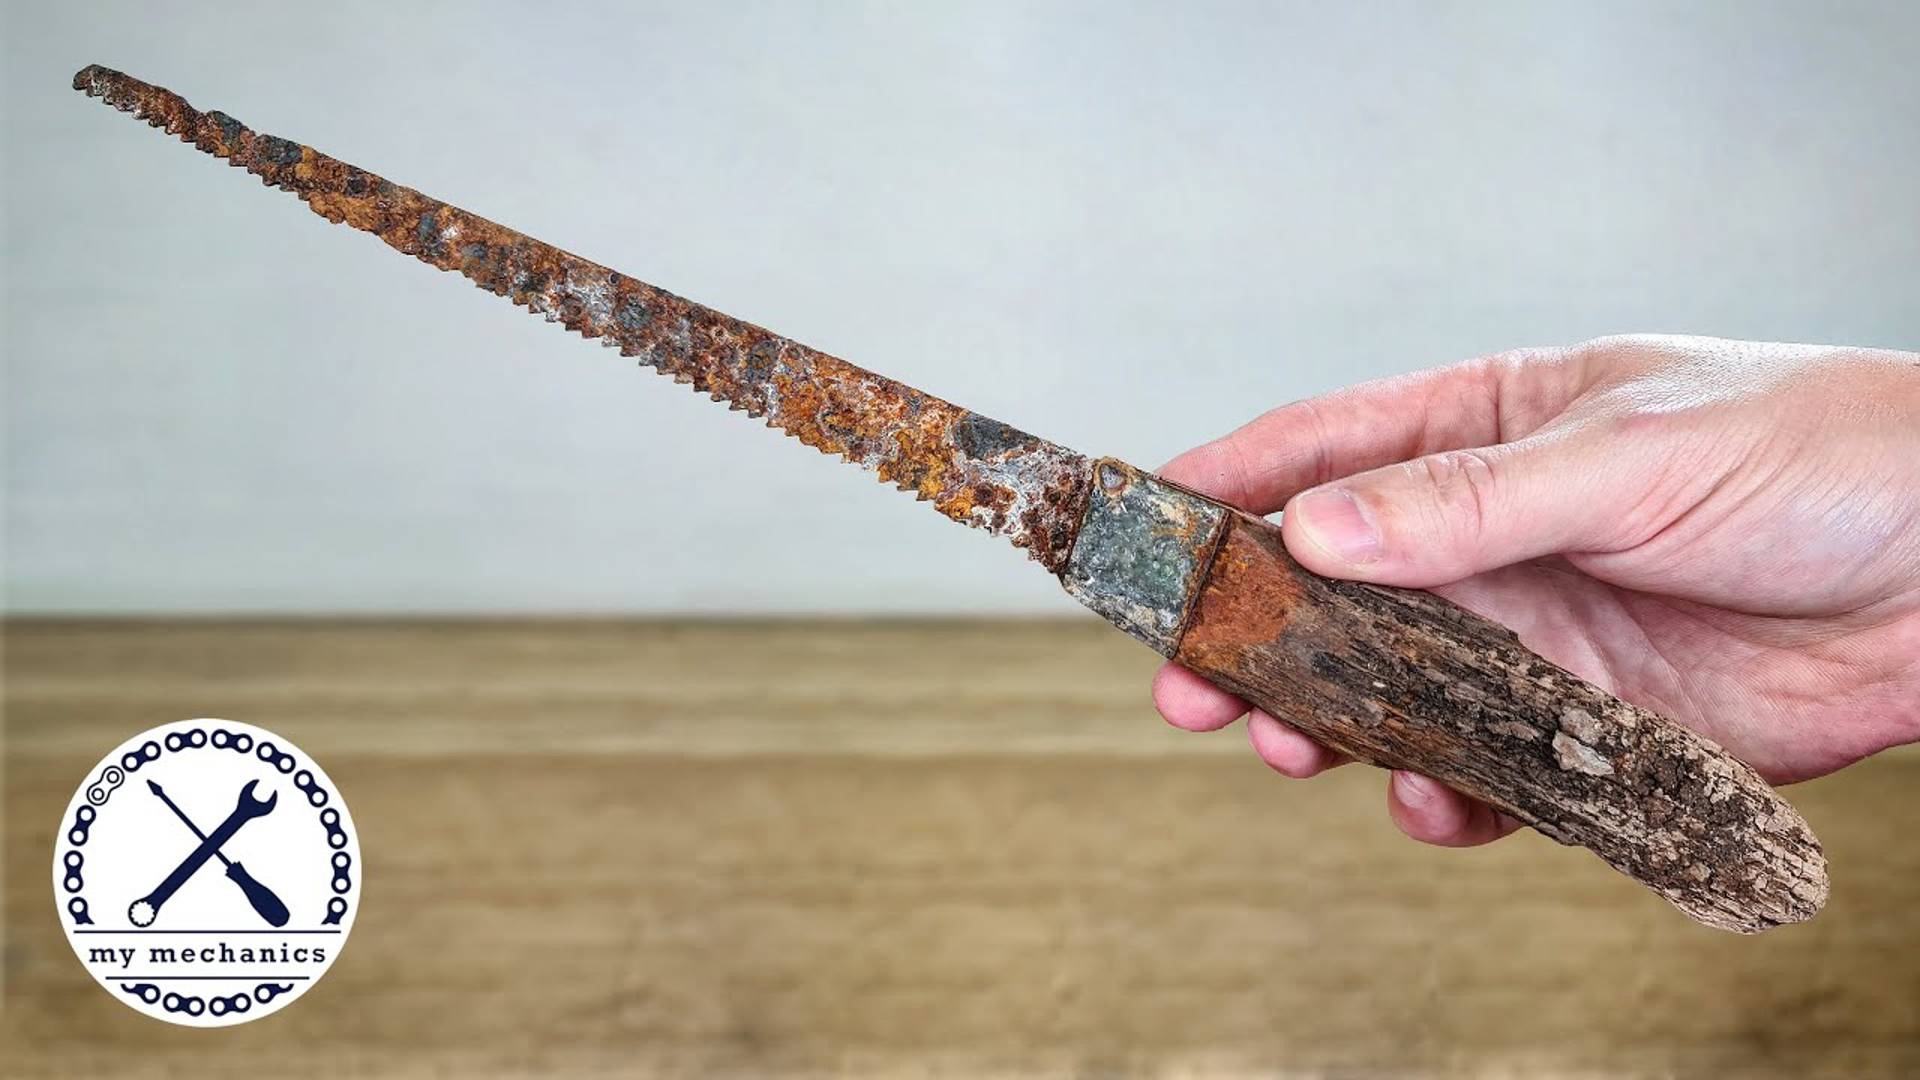 Antique Rusty Pruning Saw - Too Broken to Restore... I Make a New One (2160p_25fps_AV1-128kbit_AAC)